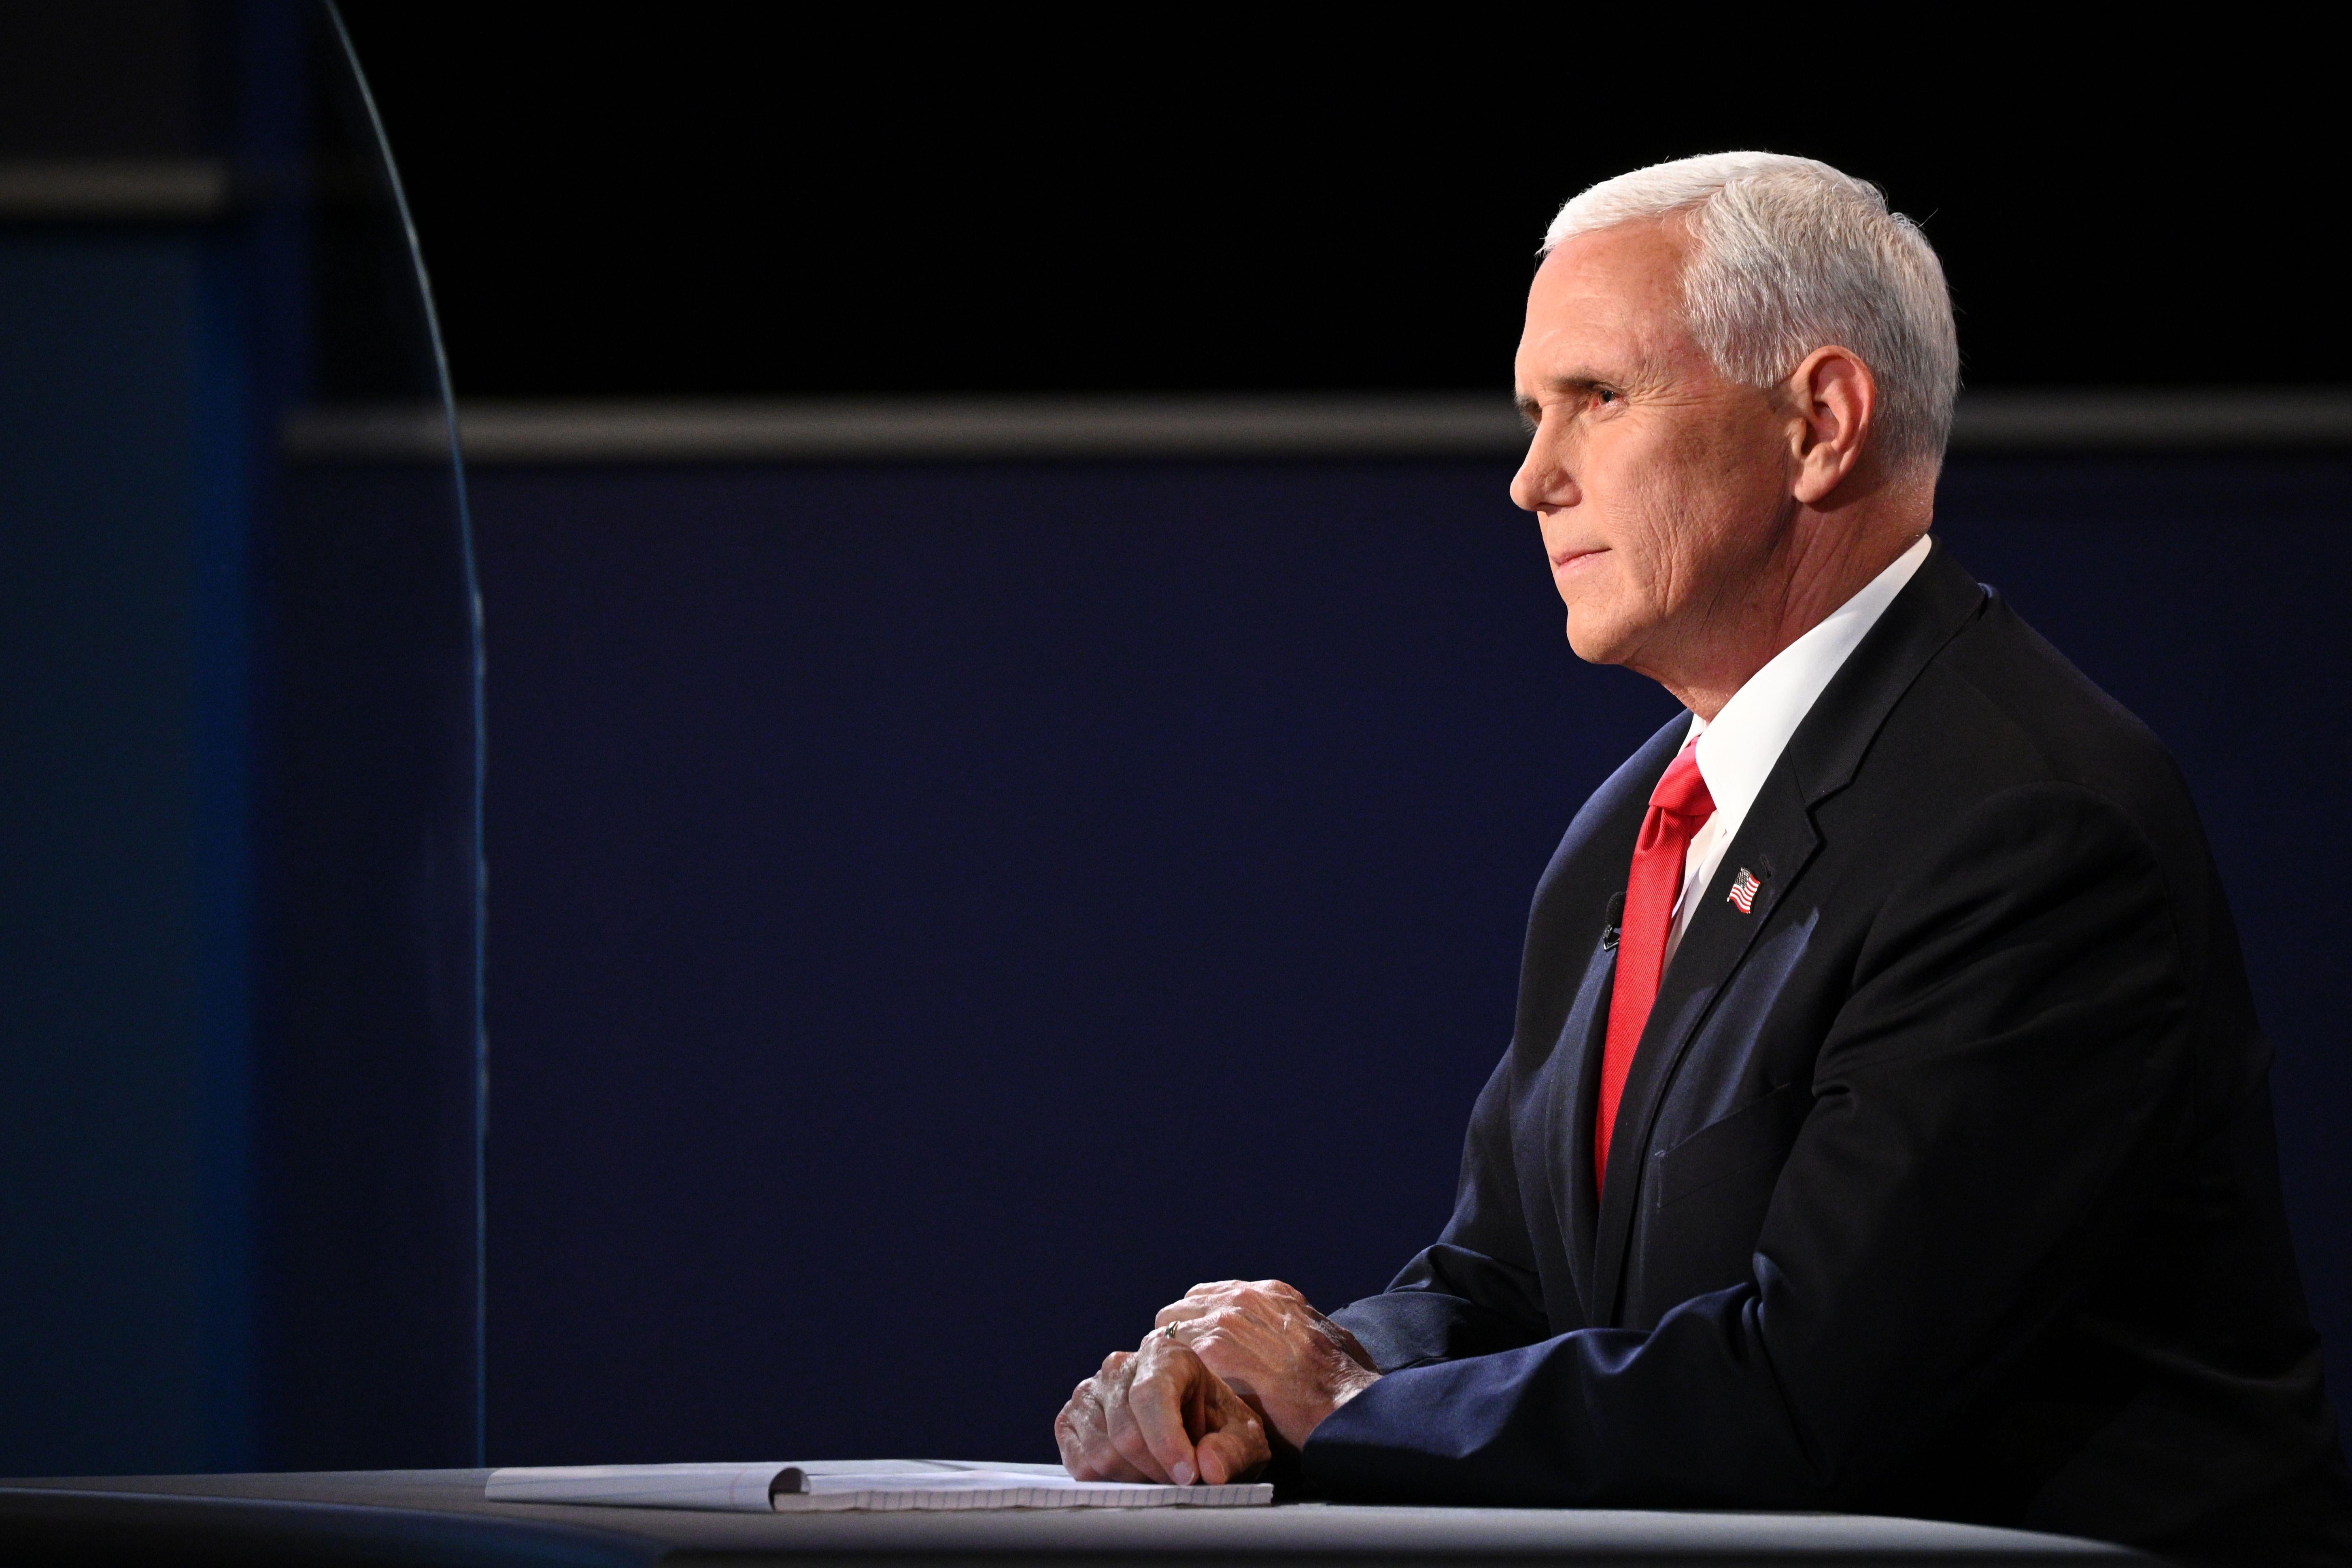 Pence sits at his desk at the debate stage.